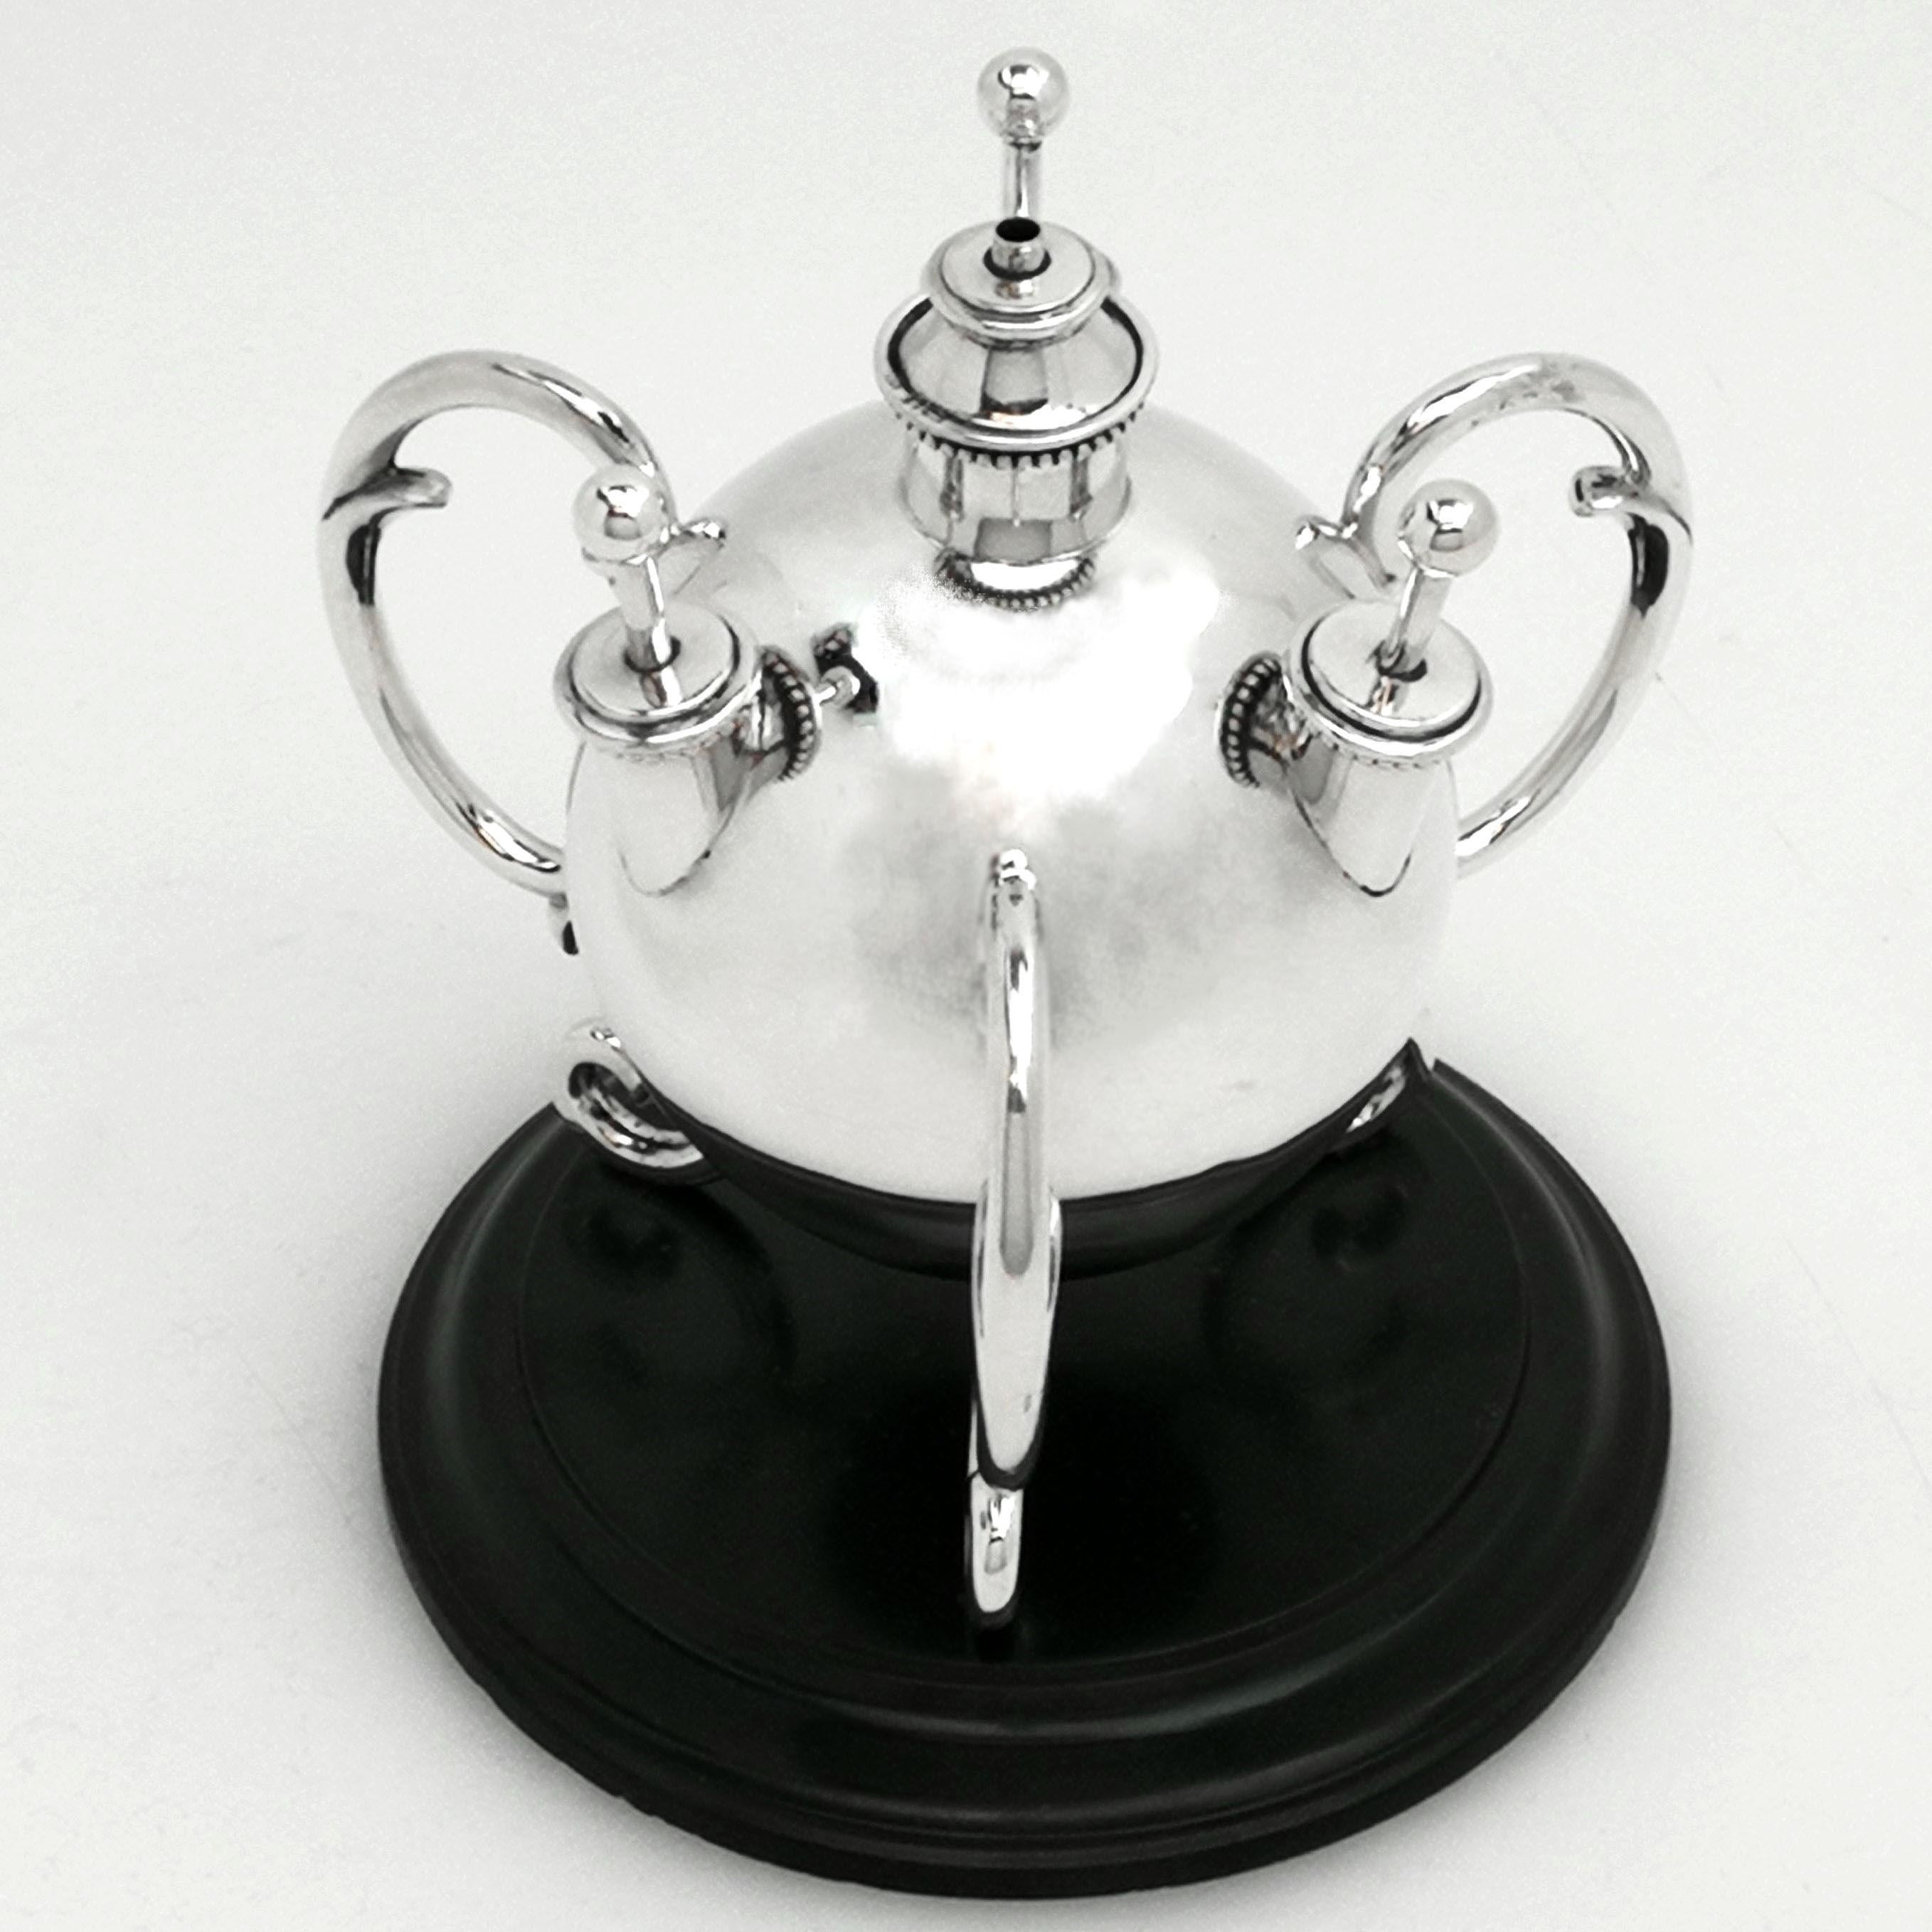 An exceptional antique Edwardian solid Silver Table Lighter on a black stone plinth. This ball shaped Table Lighter is supported on three double scroll feet. The Lighter has a central burner and three individual removable wands as lighters that can